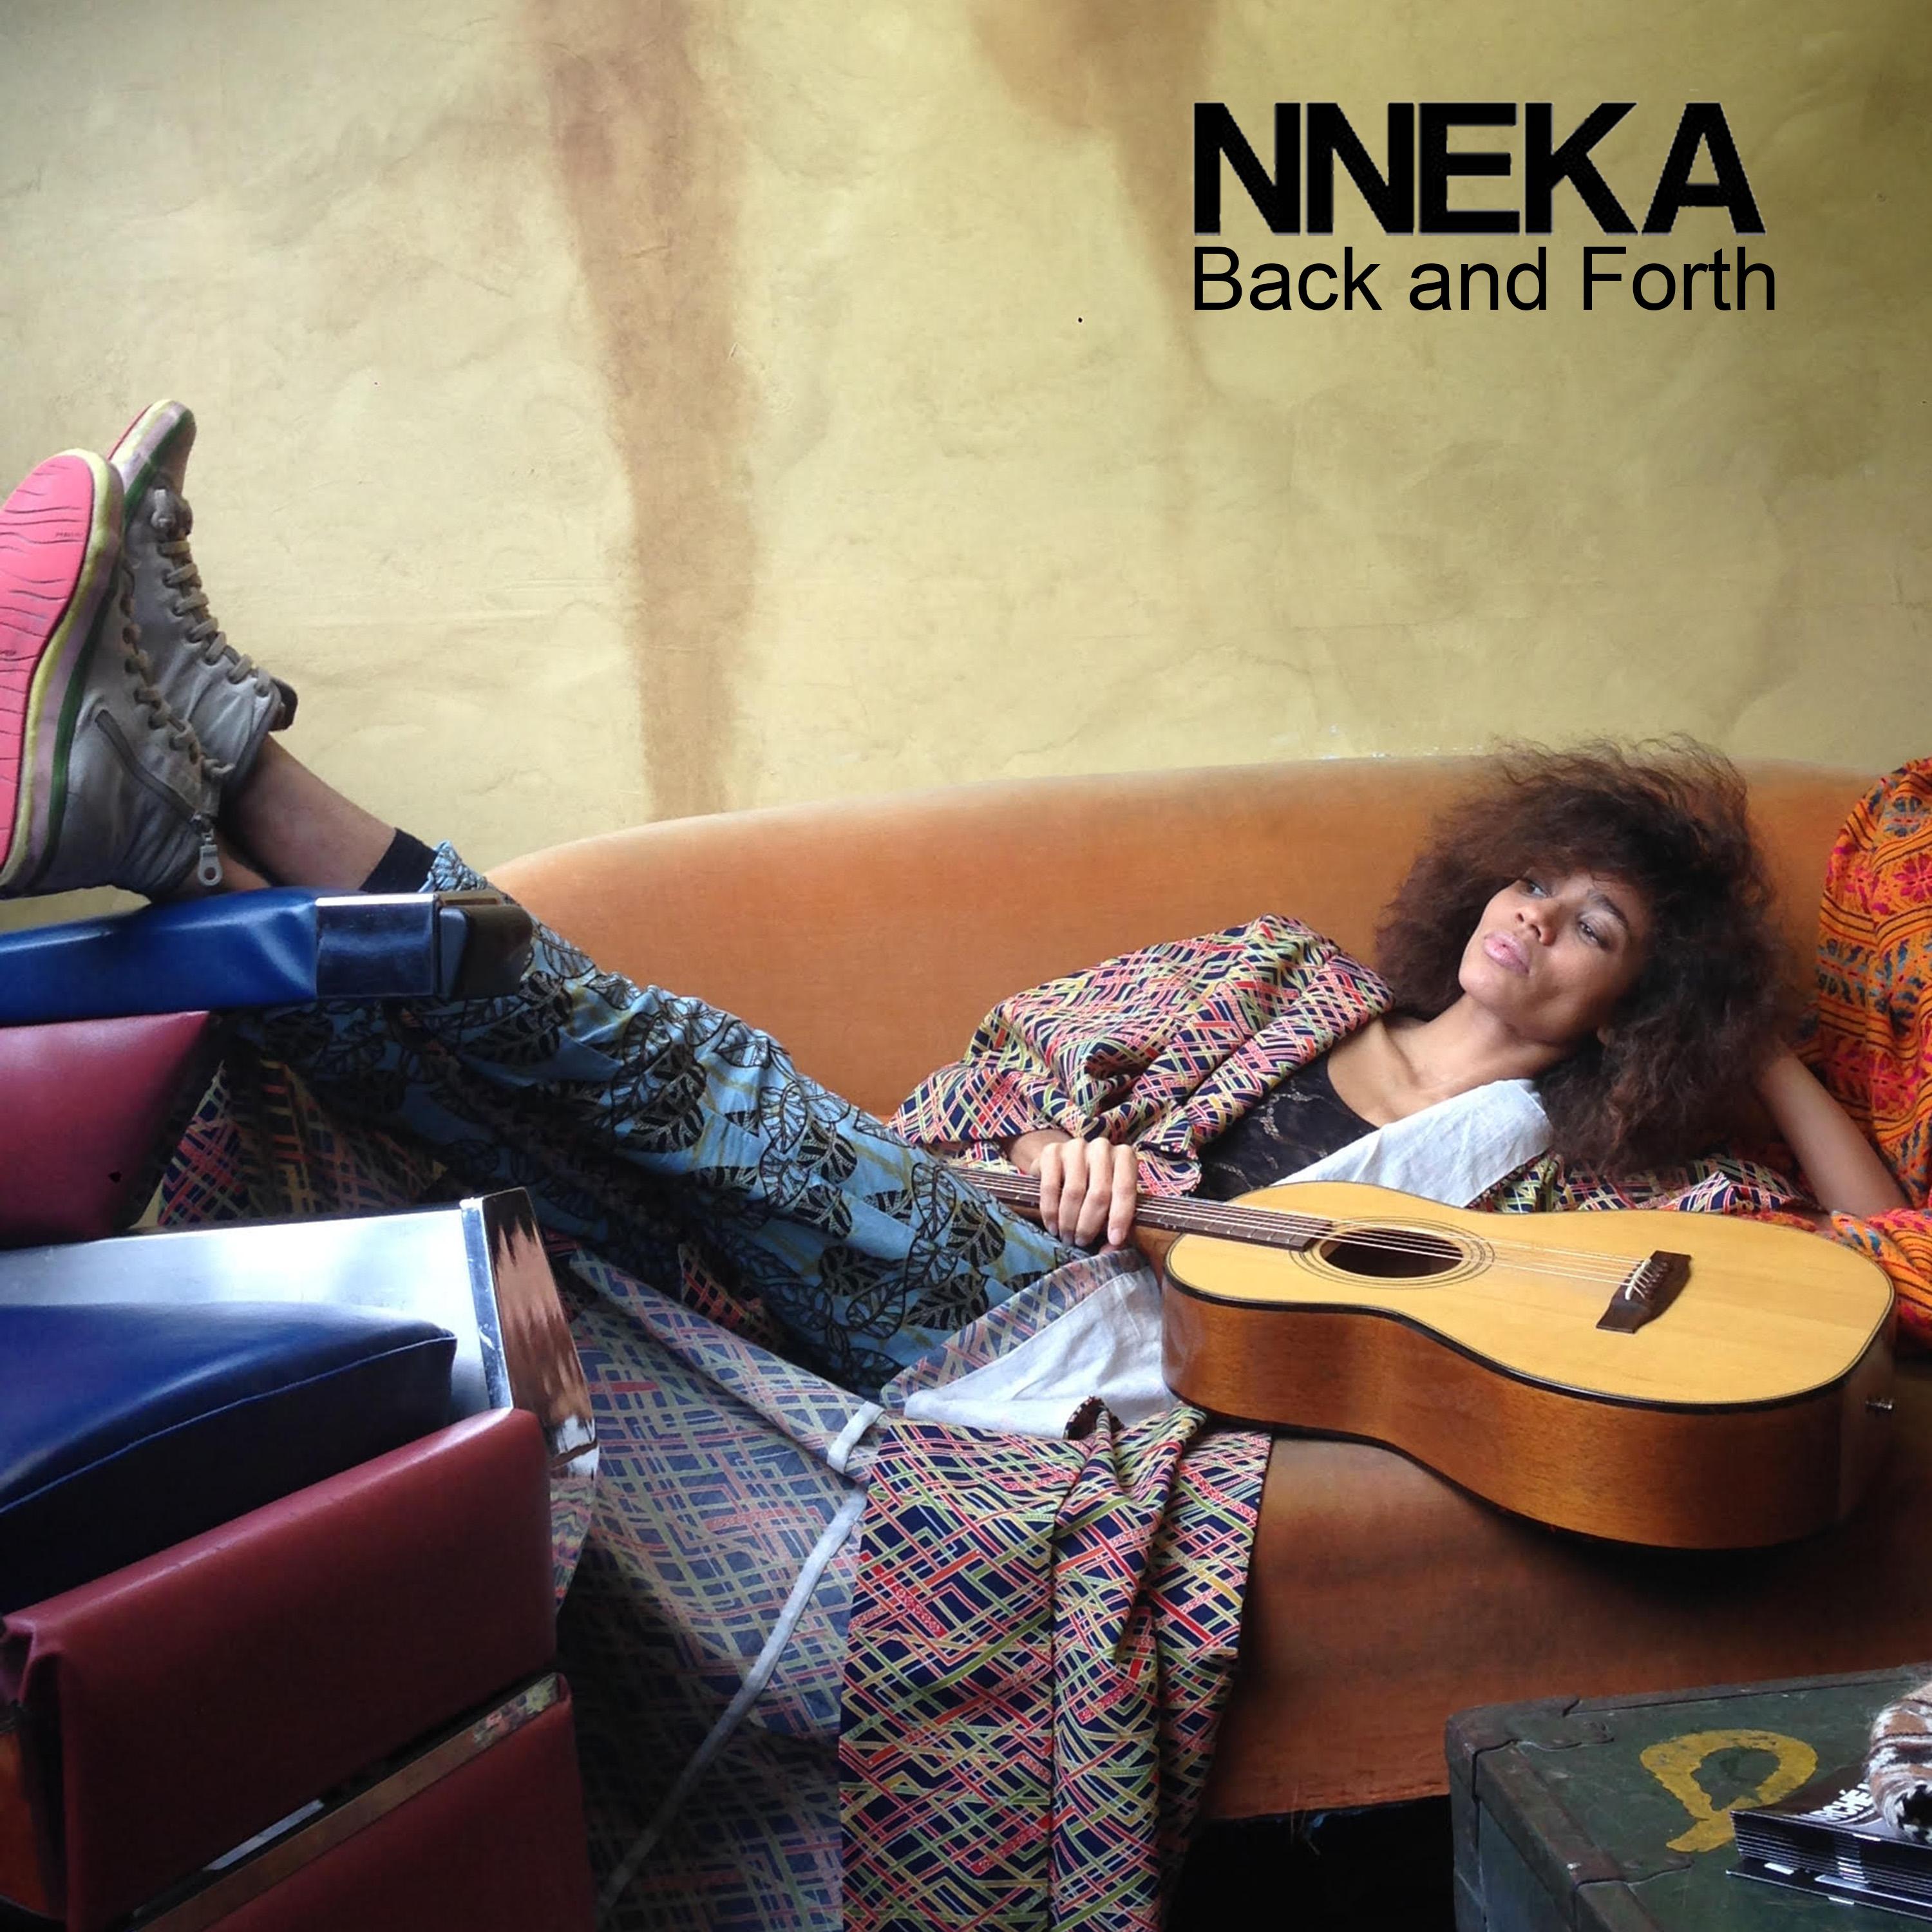 Nneka - Back and Forth